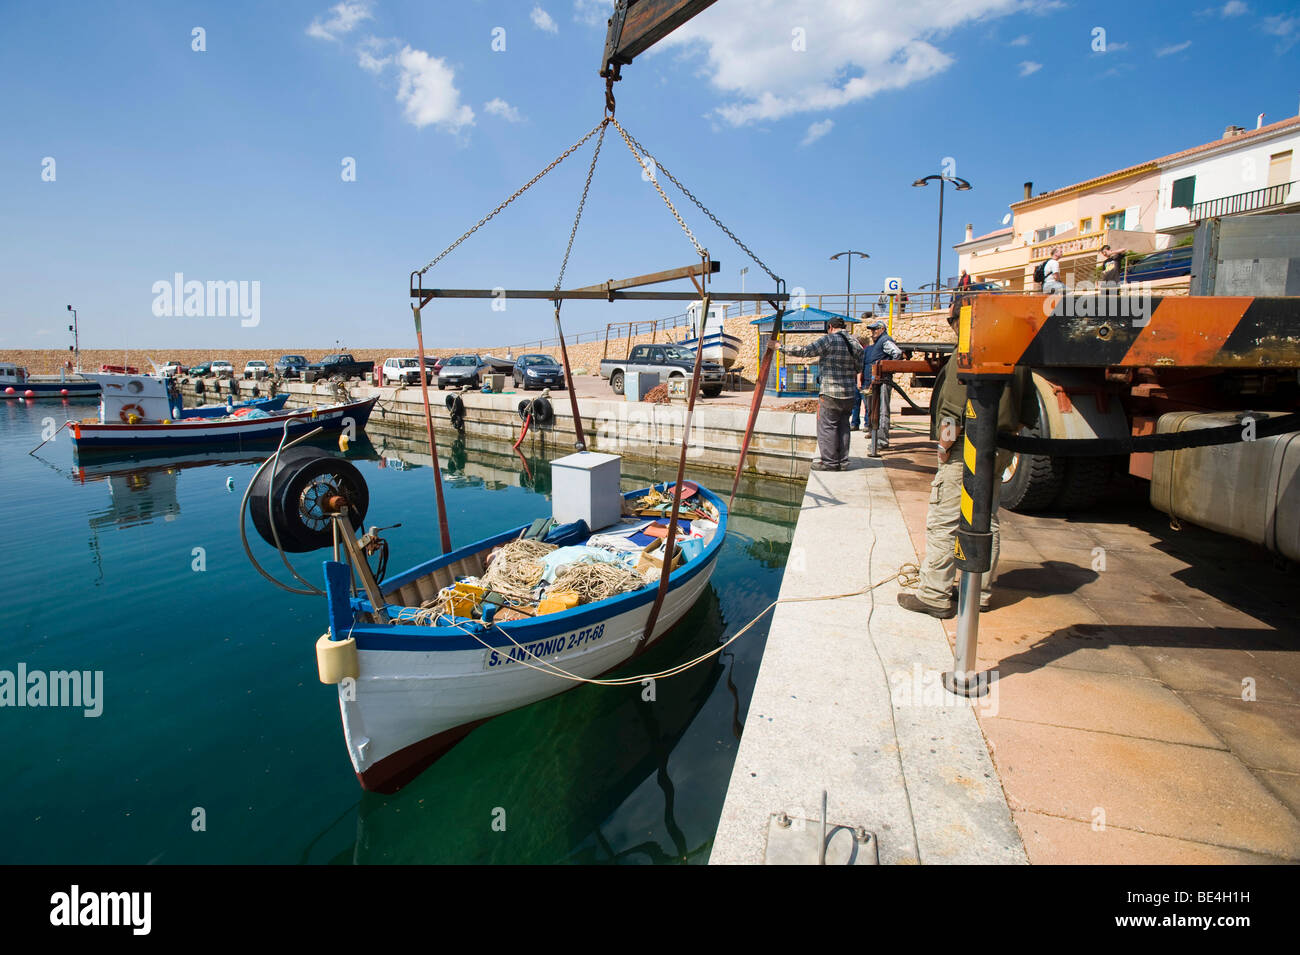 Fishing boat is being lowered into the harbor basin by a crane, Isola Rossa, Sardinia, Italy, Europe Stock Photo